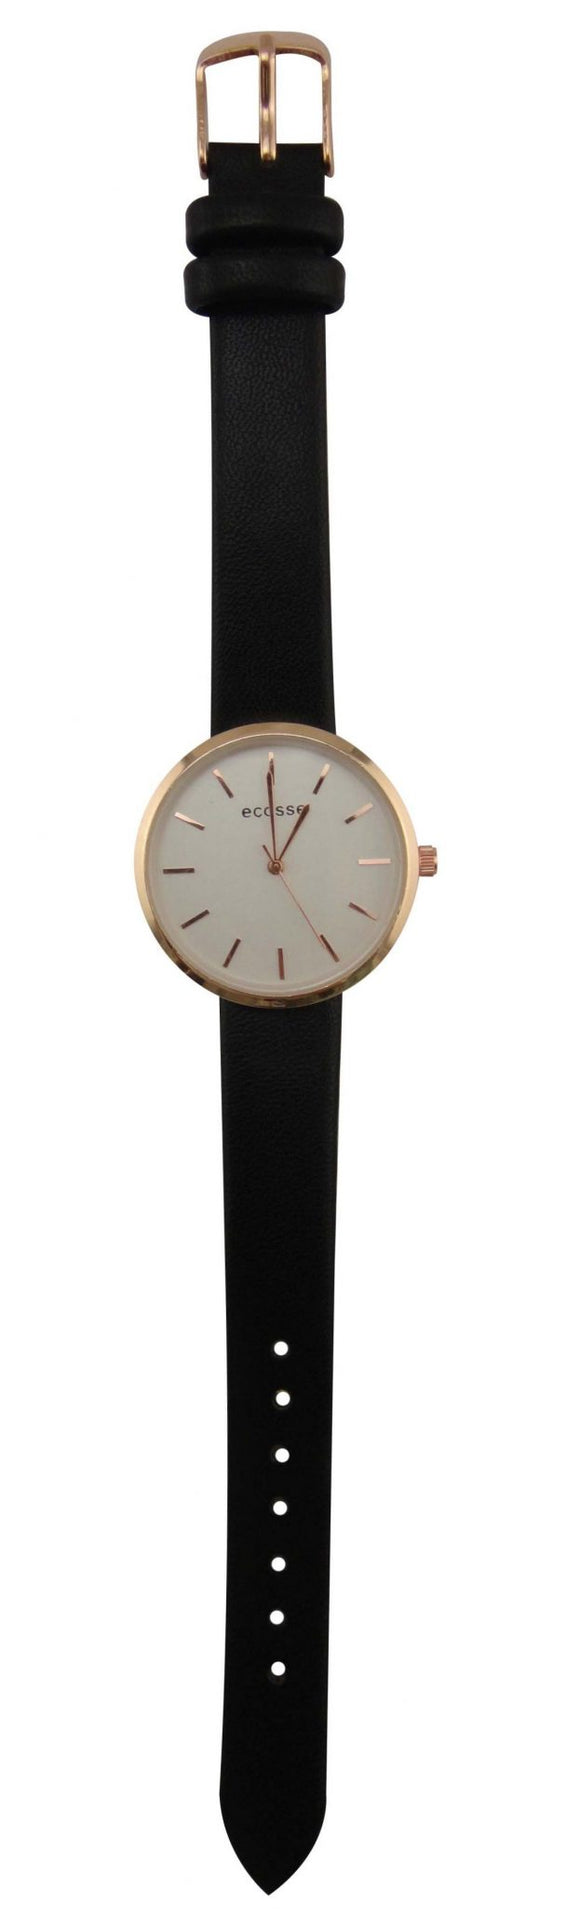 Black and Rose Gold Watch